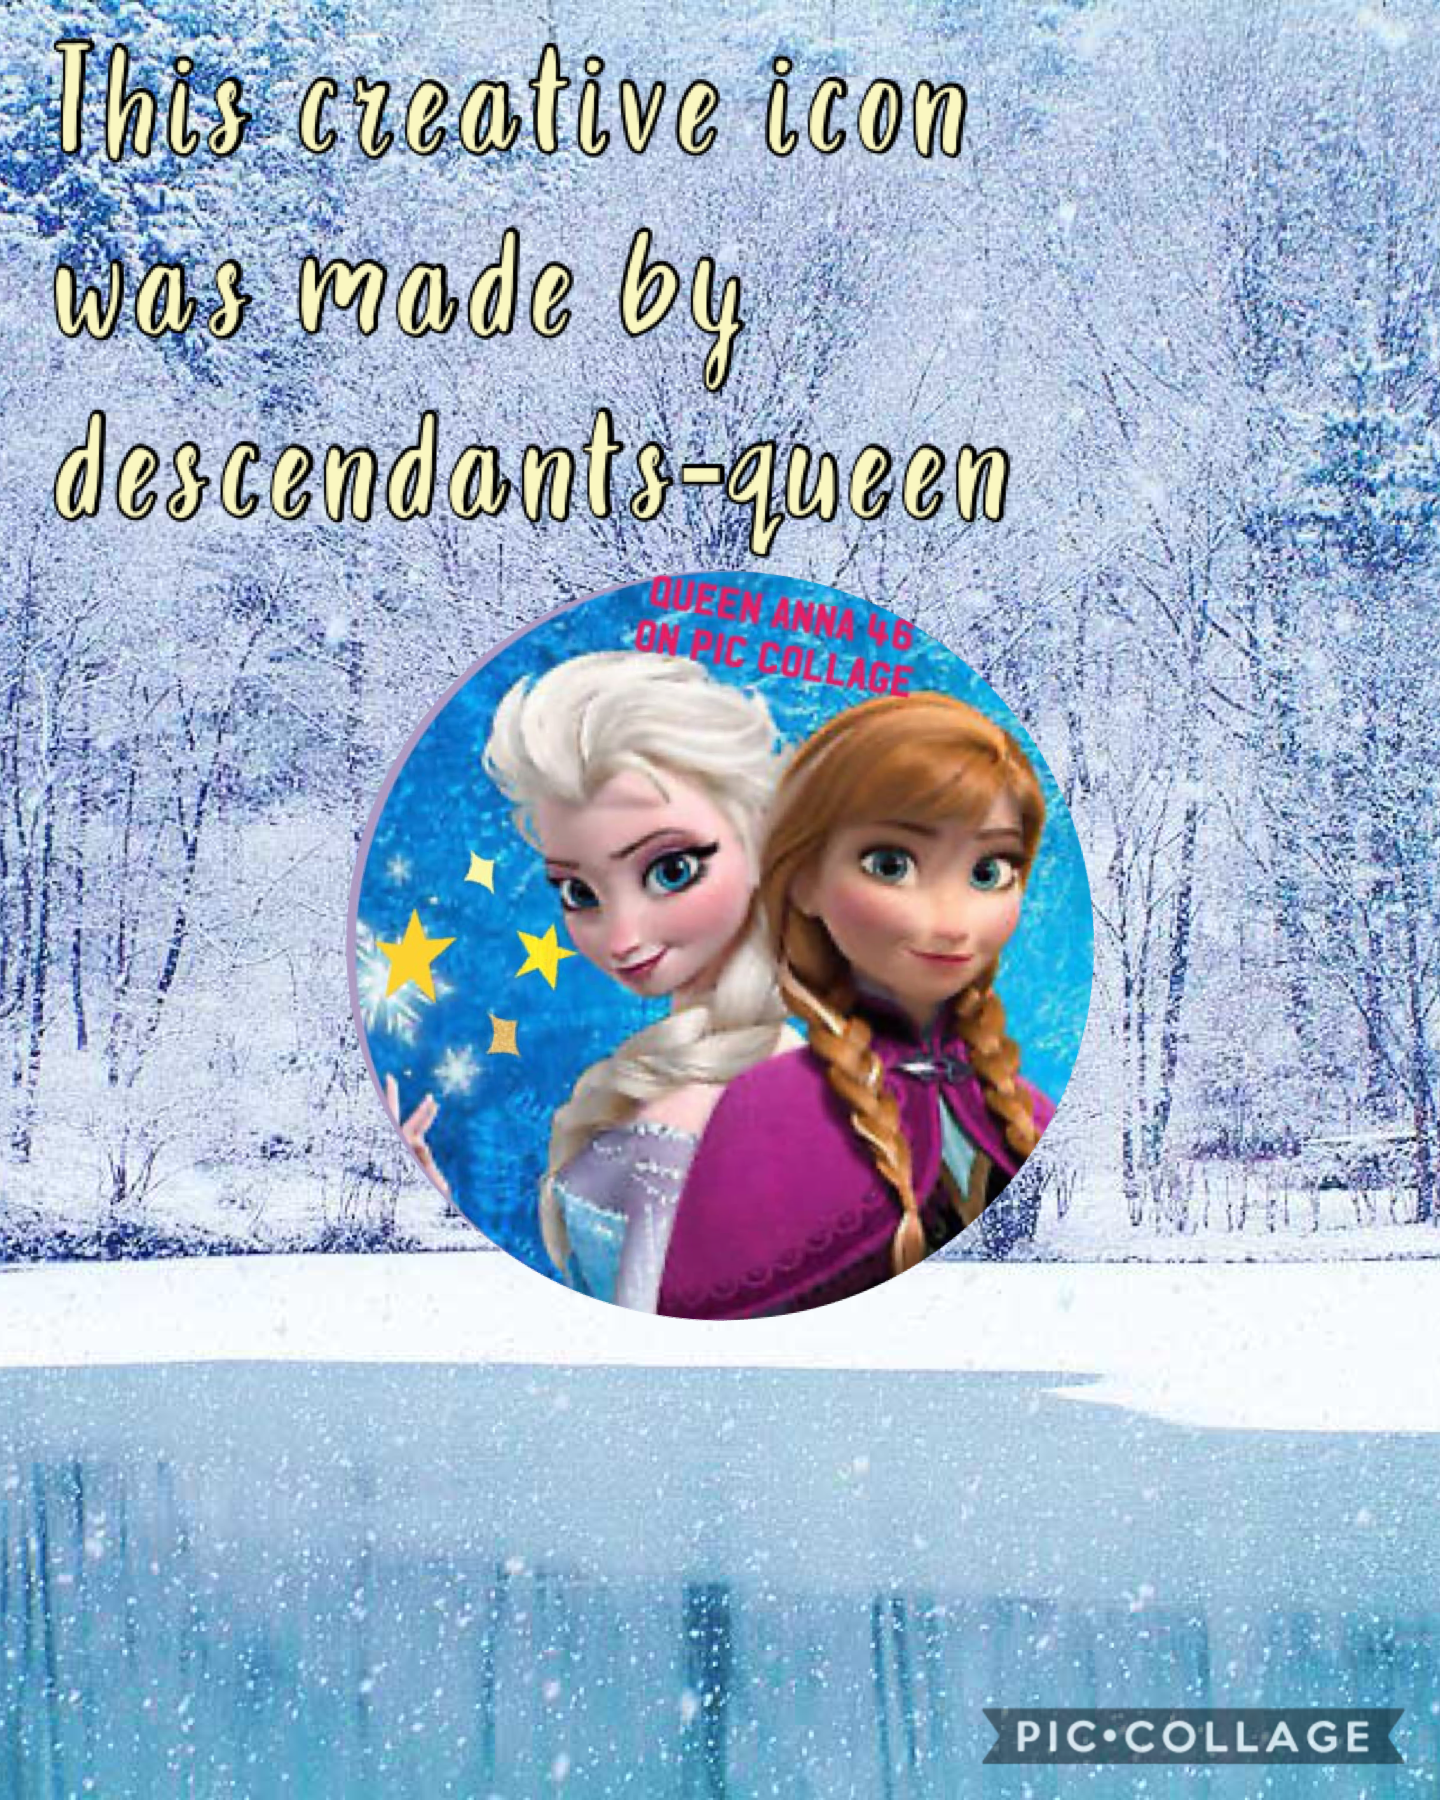 This creative icon was made by descendants-queen 